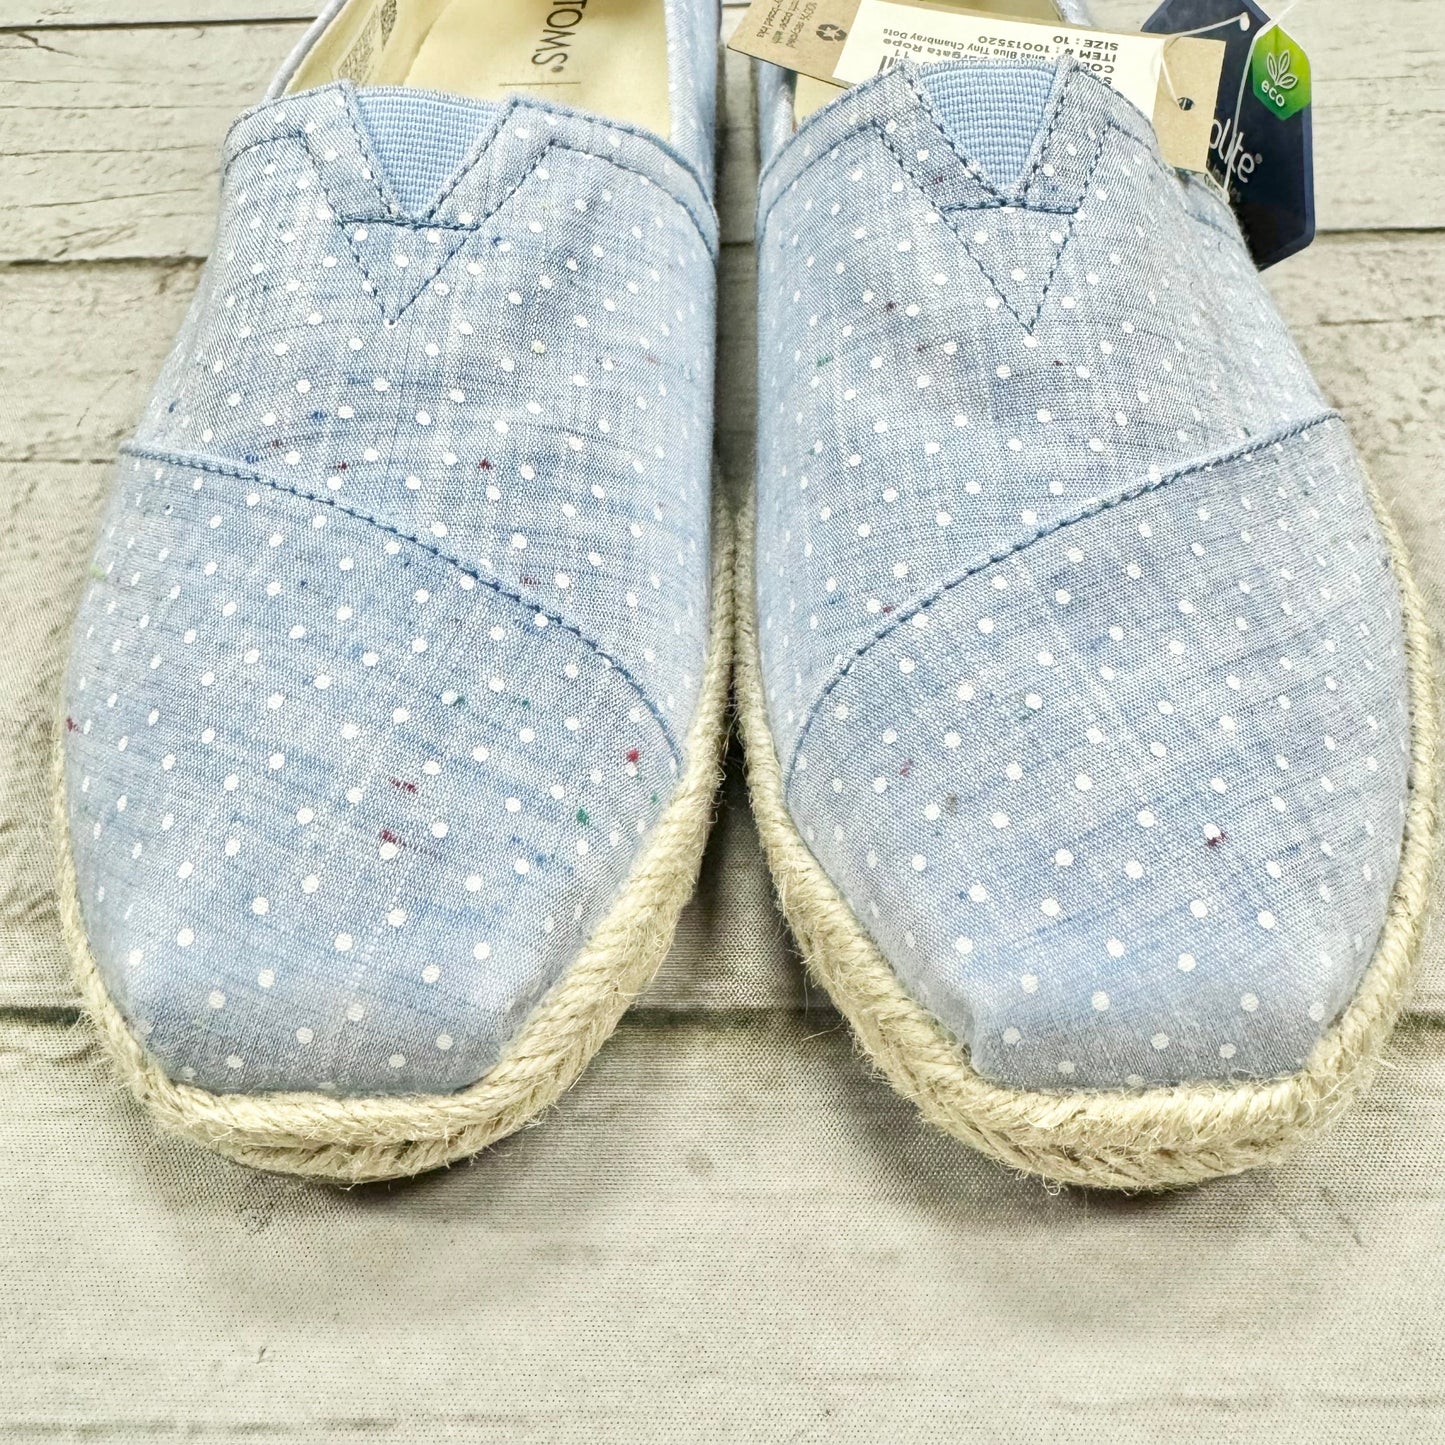 Shoes Flats By Toms  Size: 10